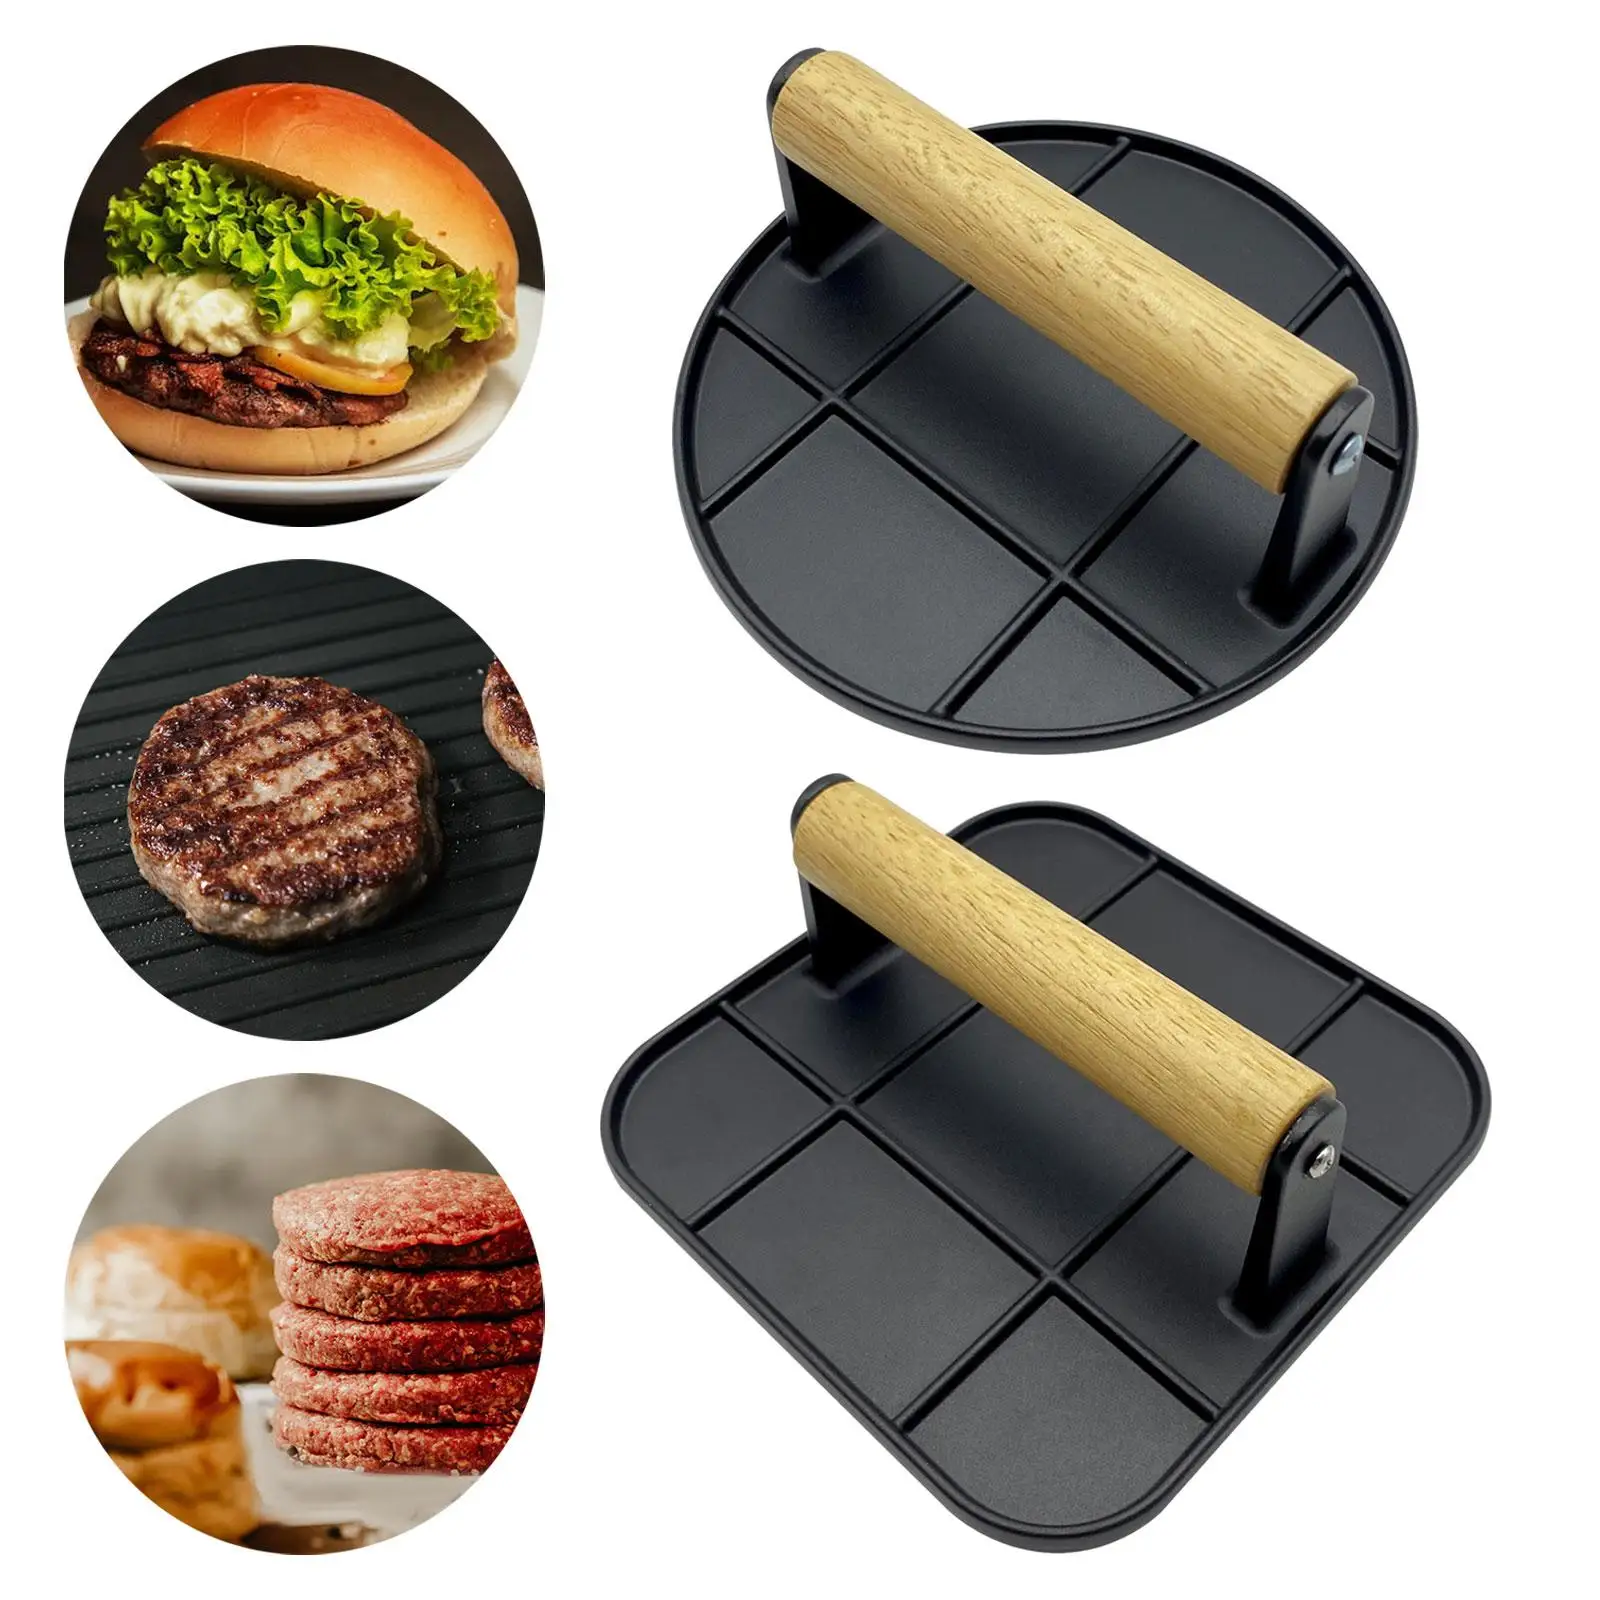 Burger Press with Wooden Handle Grill Press for Cooking Grill Sandwich